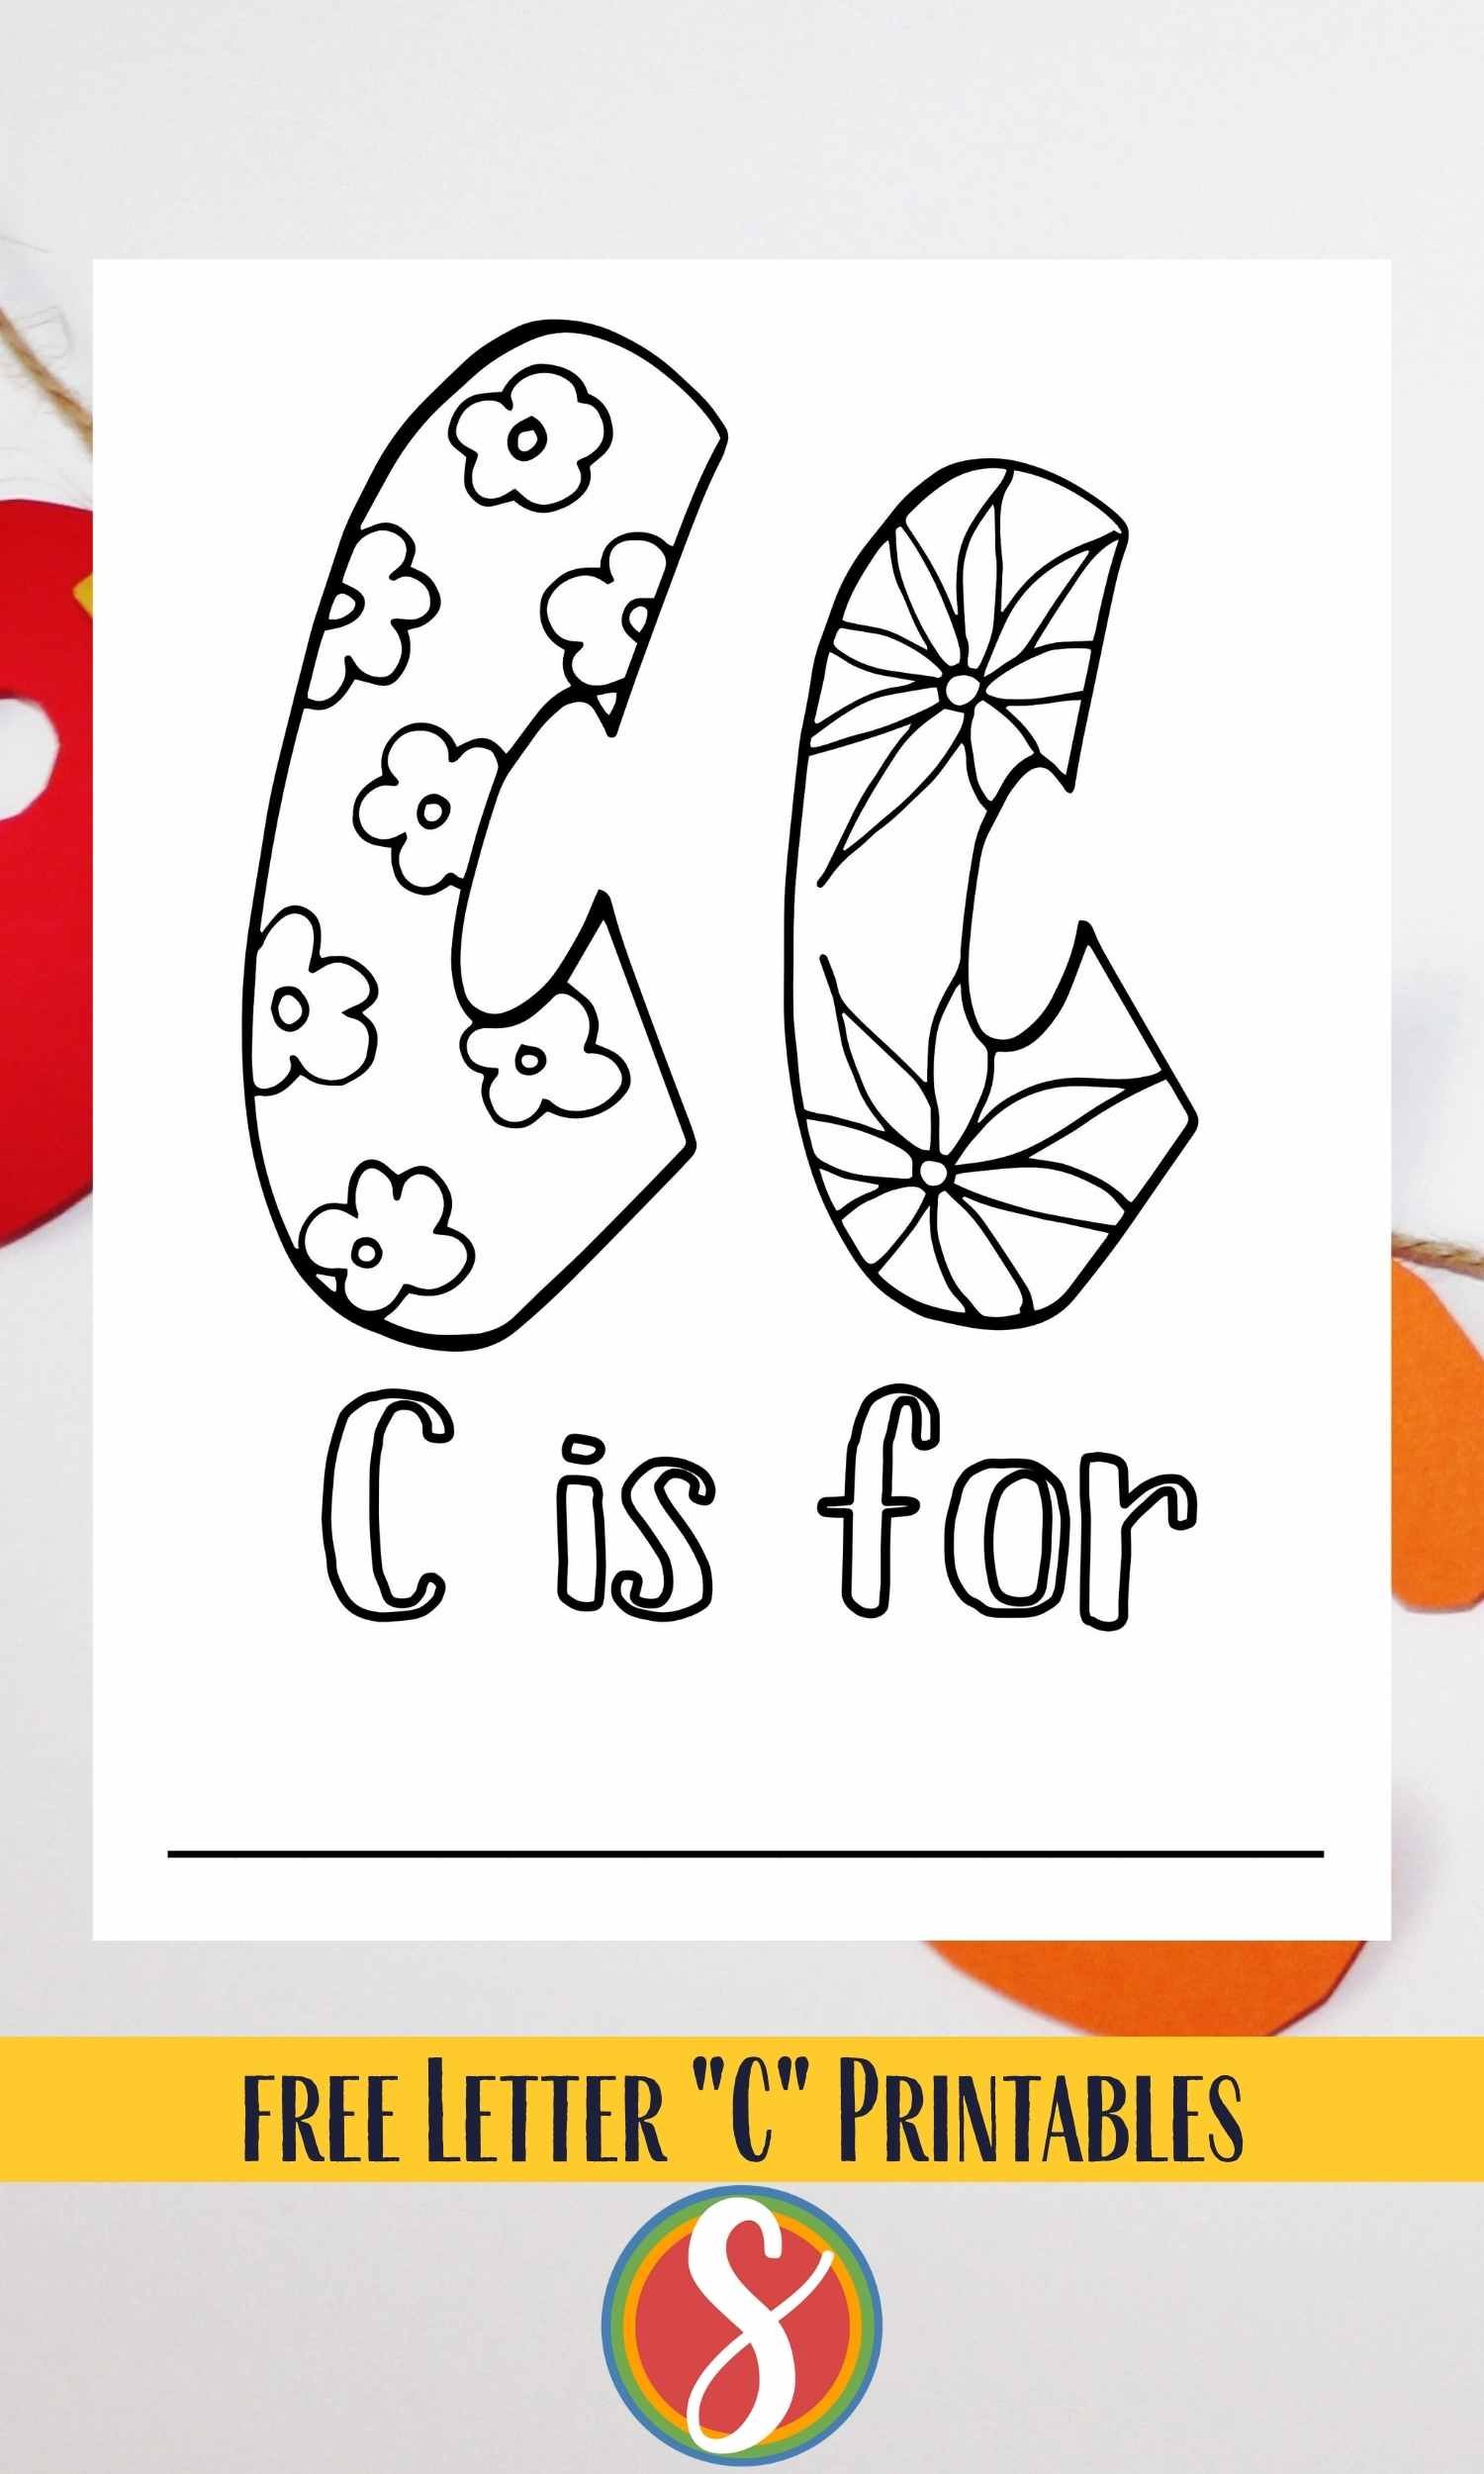 2 bubble letter c's, one big one small, full of flowers to color